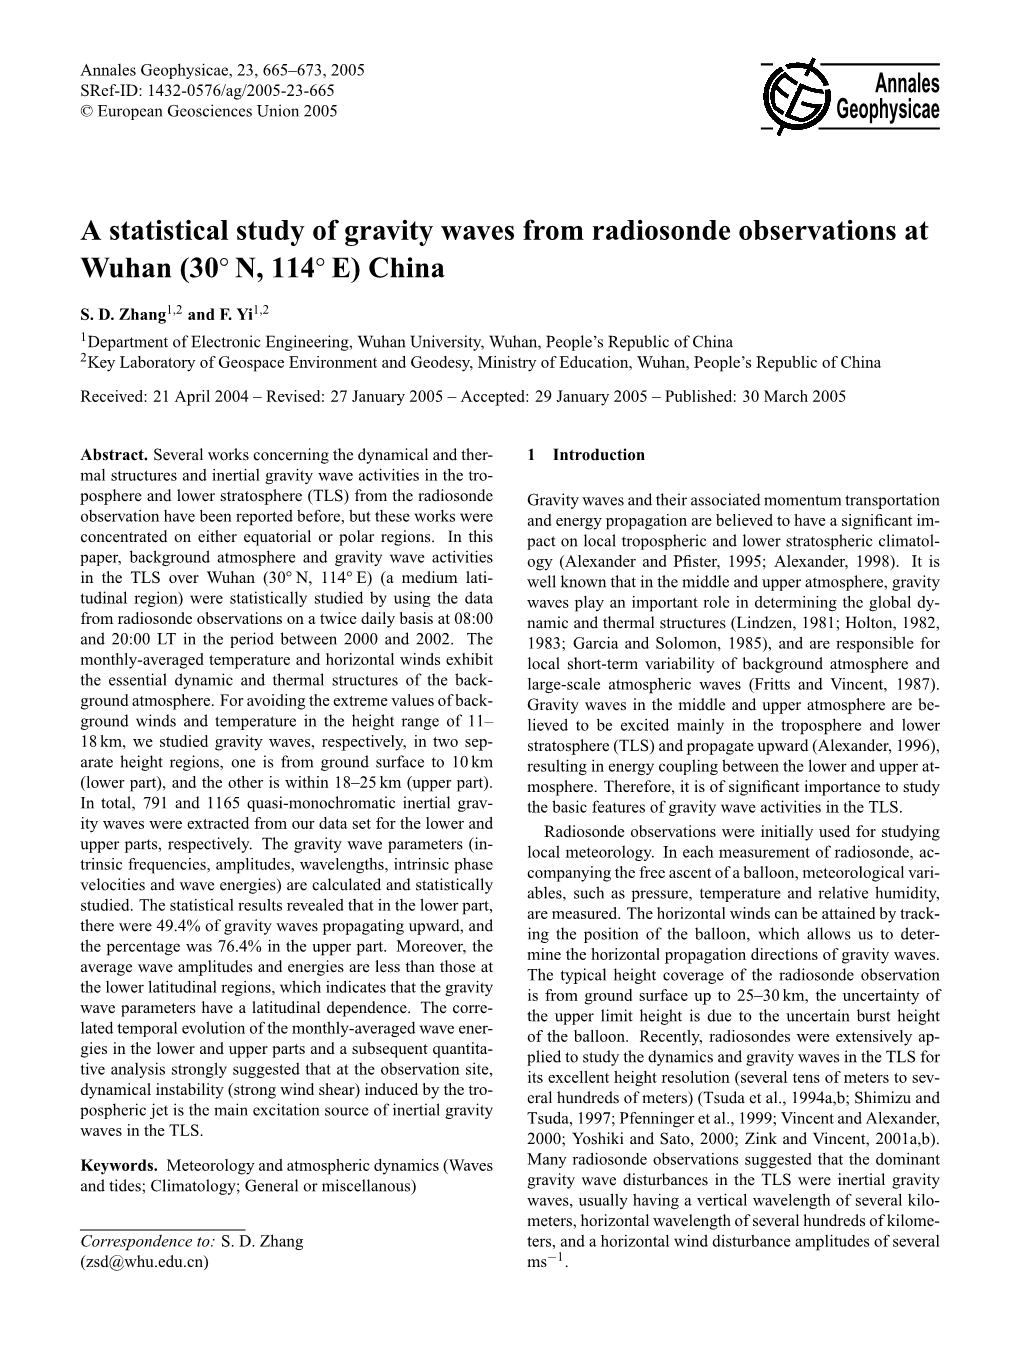 A Statistical Study of Gravity Waves from Radiosonde Observations at Wuhan (30◦ N, 114◦ E) China